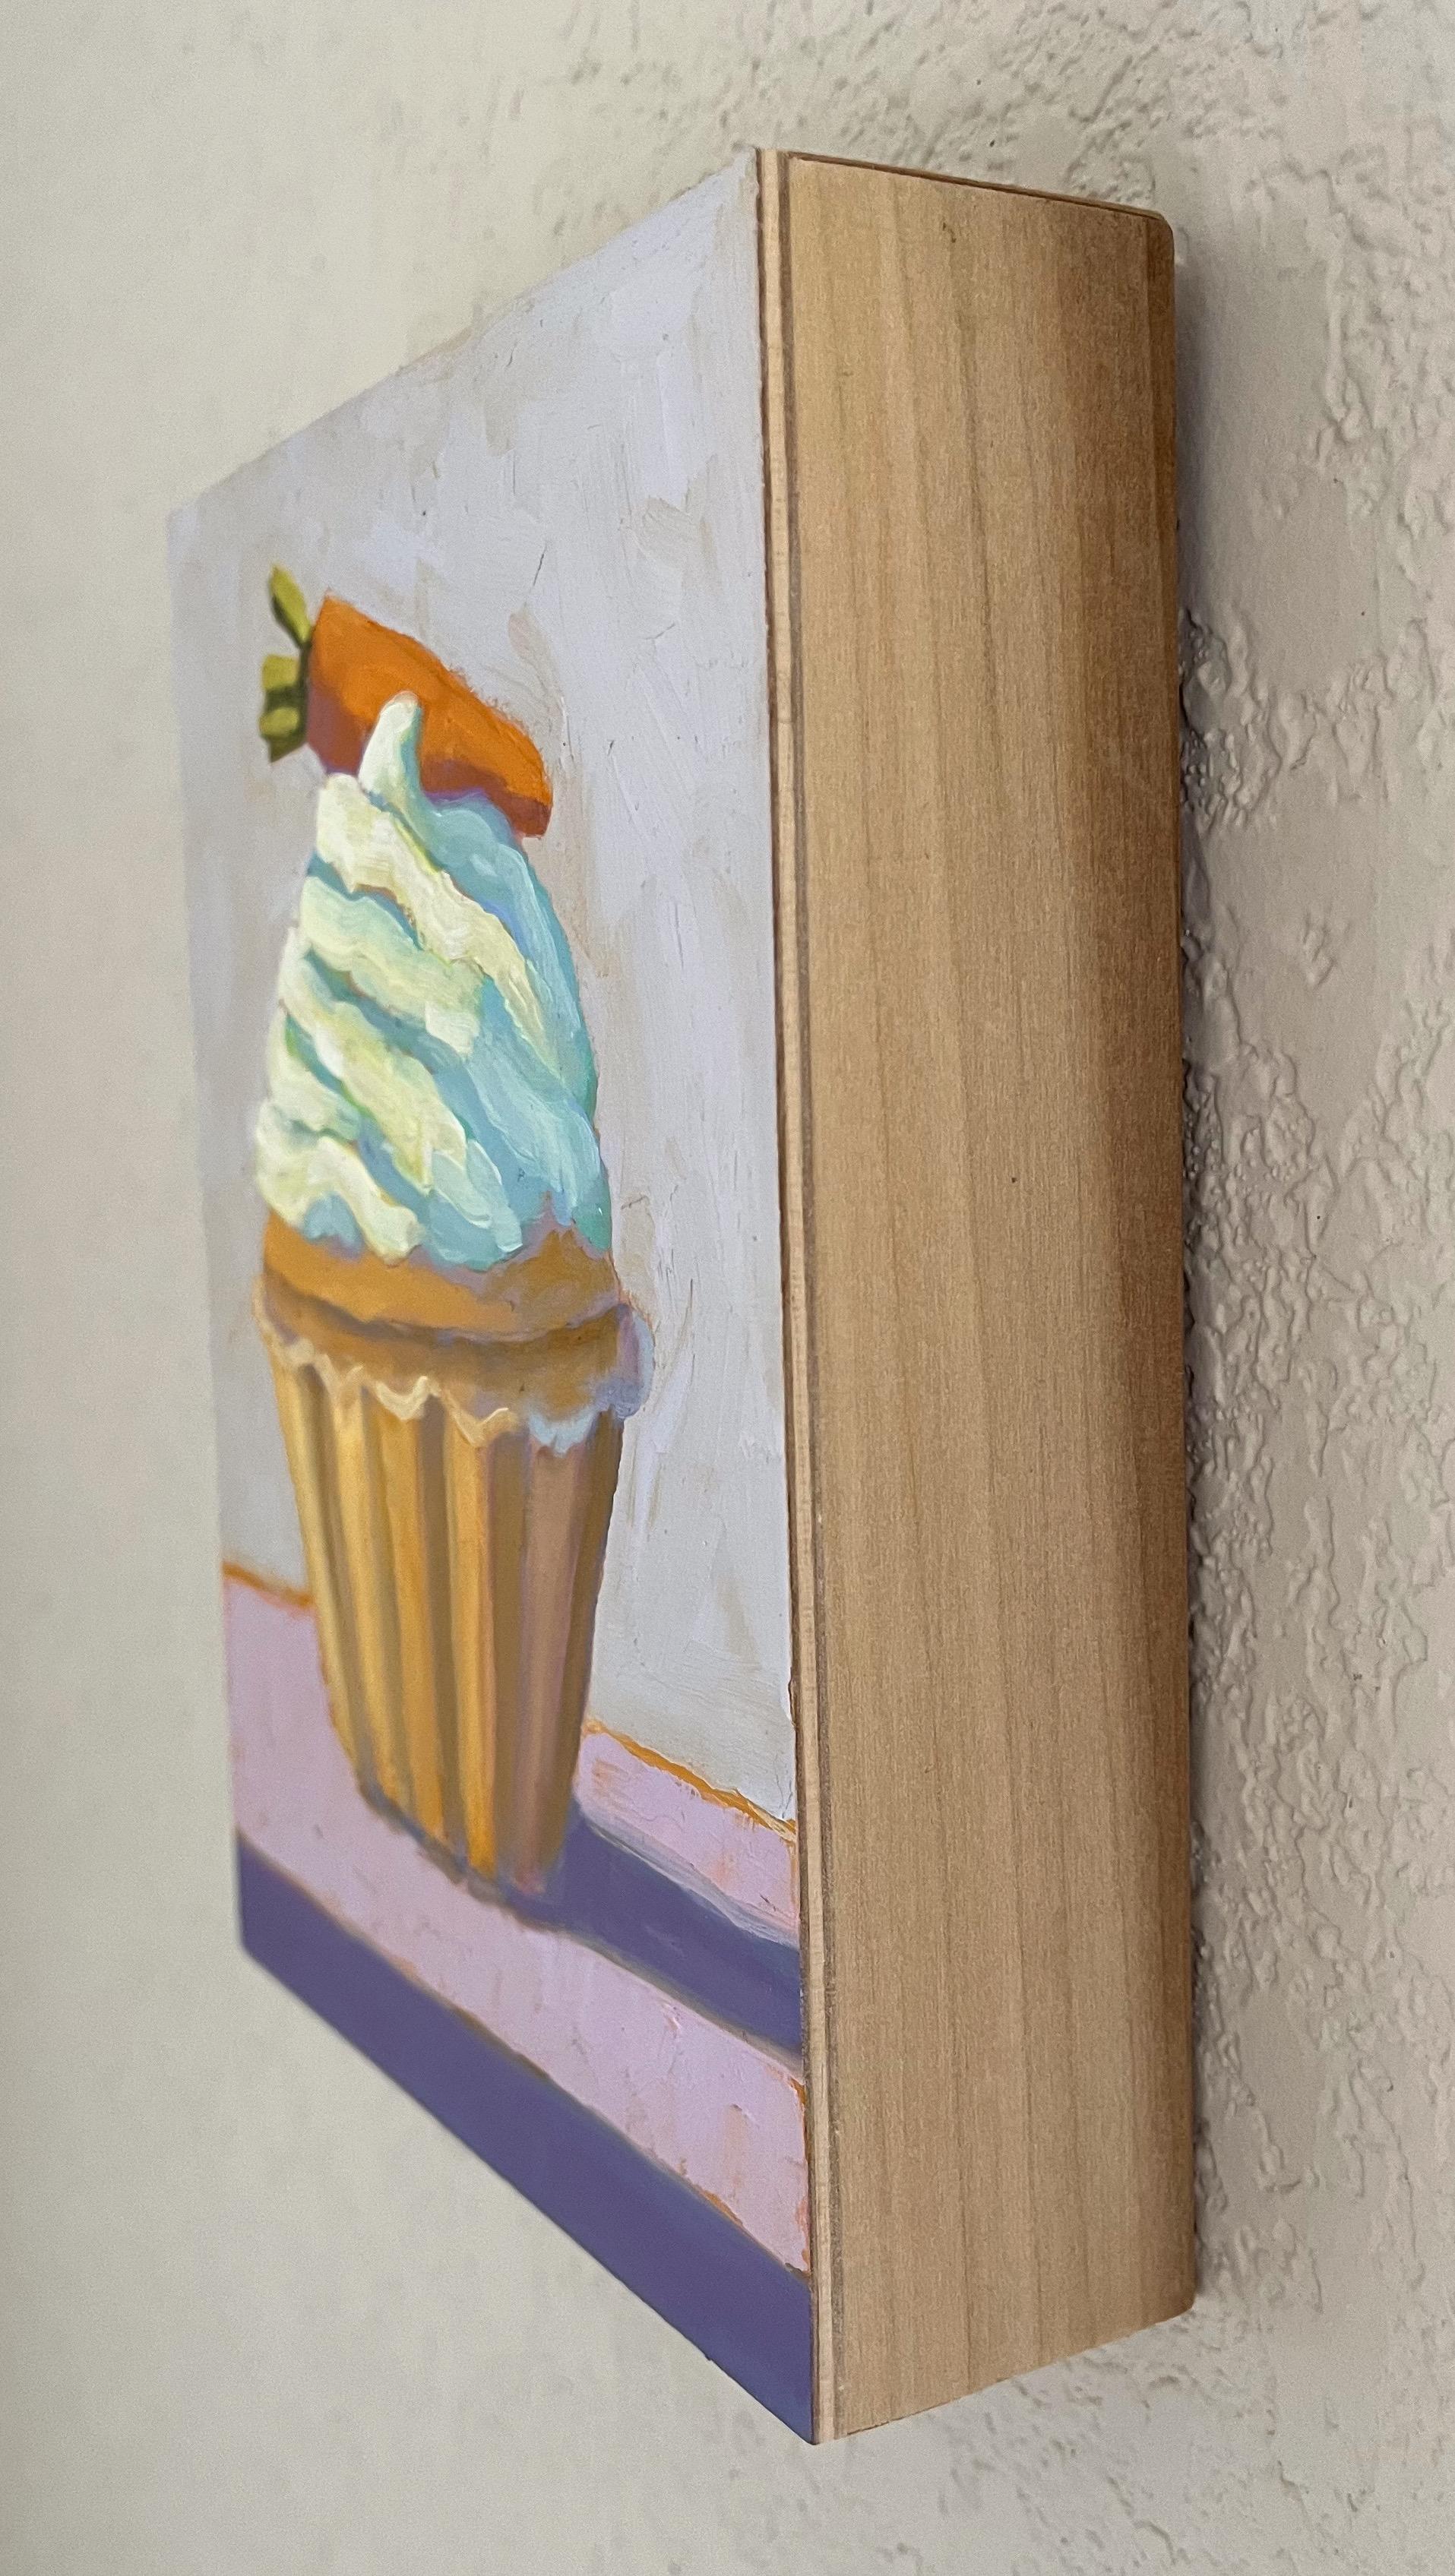 <p>Artist Comments<br>A carrot cupcake with cream cheese frosting, topped with marzipan, serves as a delightful treat in this still-life painting. Artist Pat Doherty draws inspiration from her background as a former commercial art director and